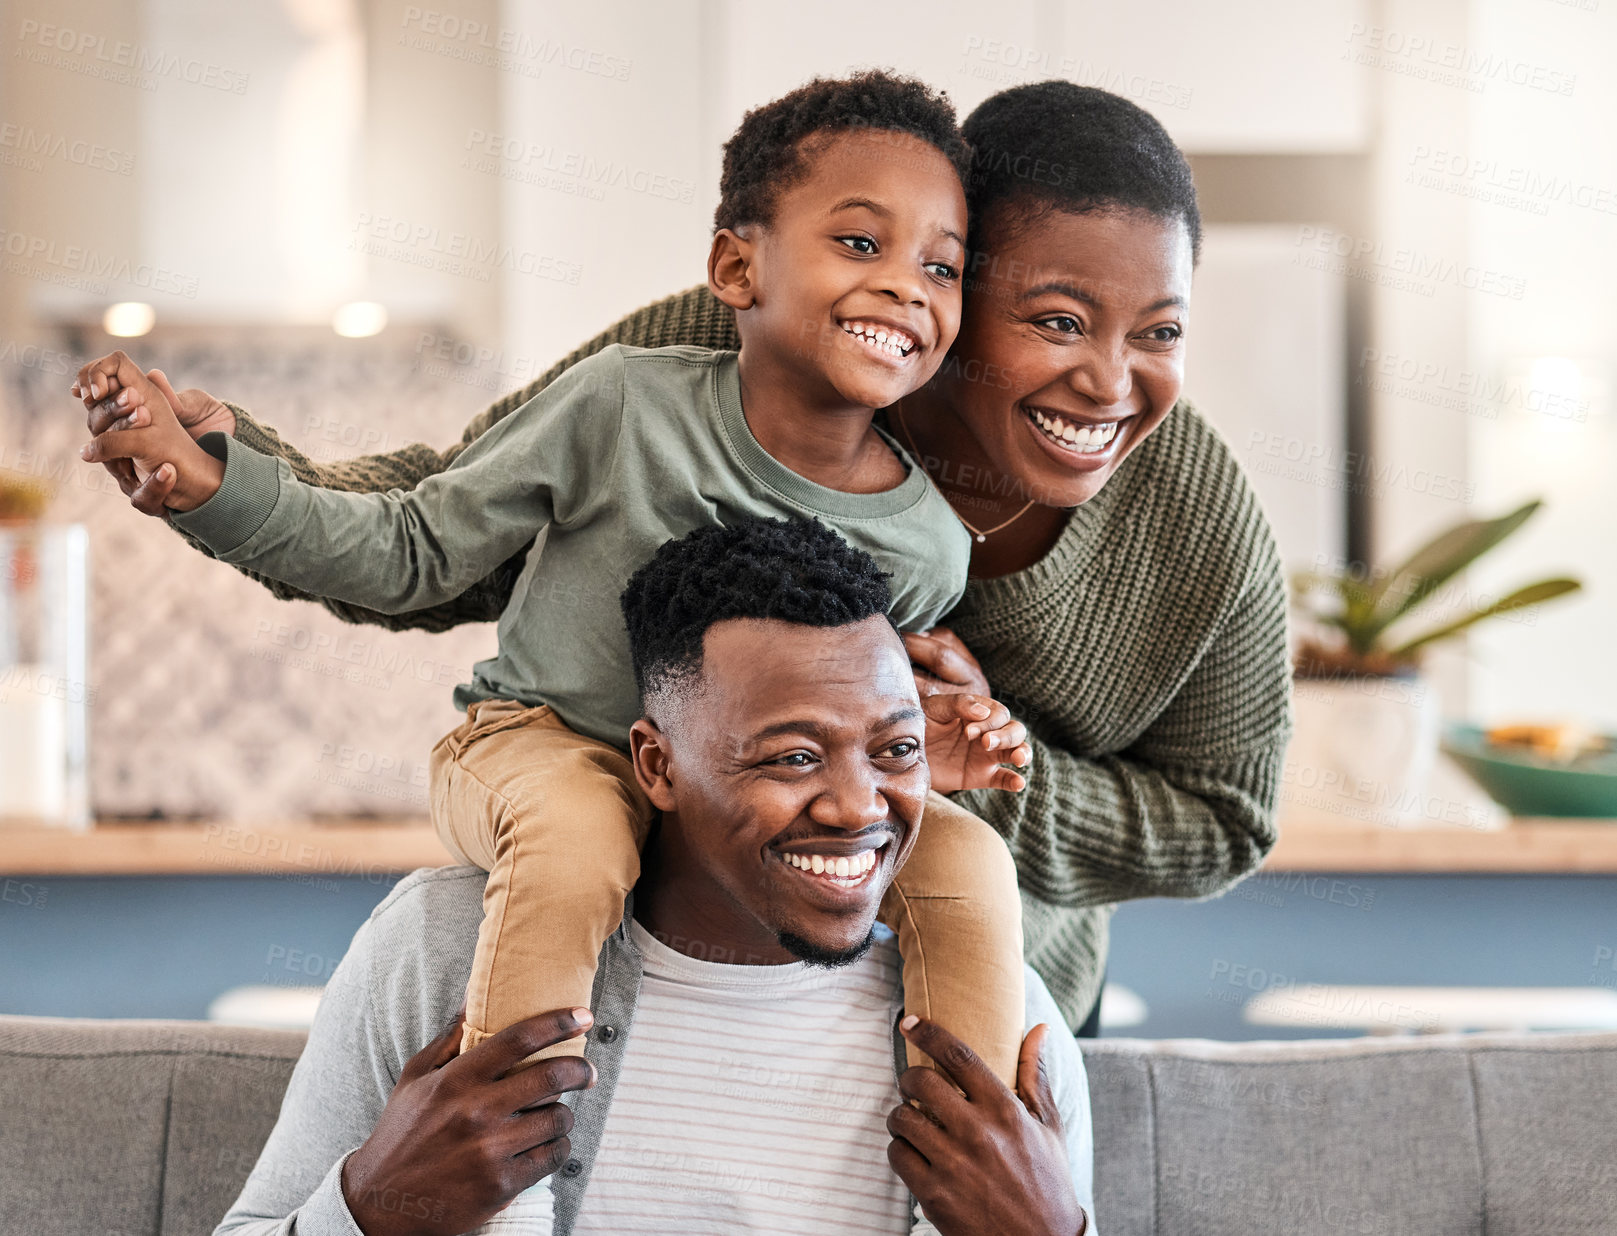 Buy stock photo Shot of a happy young family playing together on the sofa at home